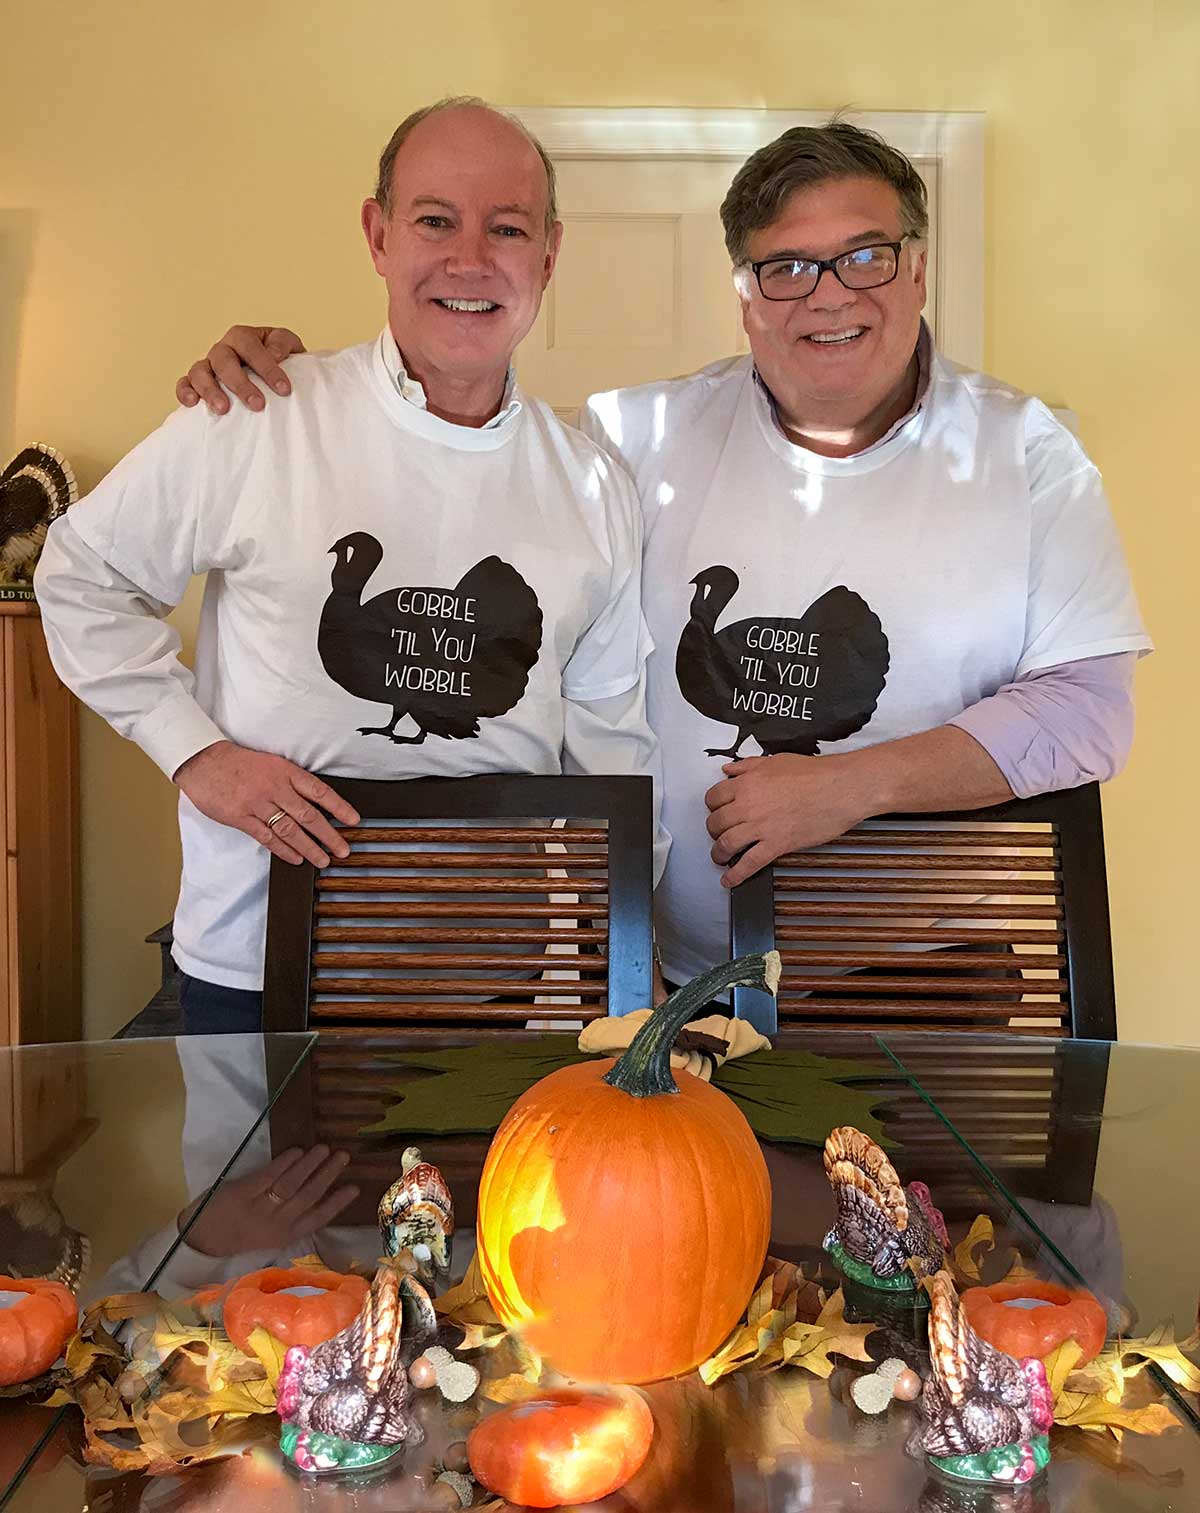 A photograph of David and the One in Thanksgiving t-shirts for the writing "We're Having a Small Thanksgiving and I'm Okay With That"